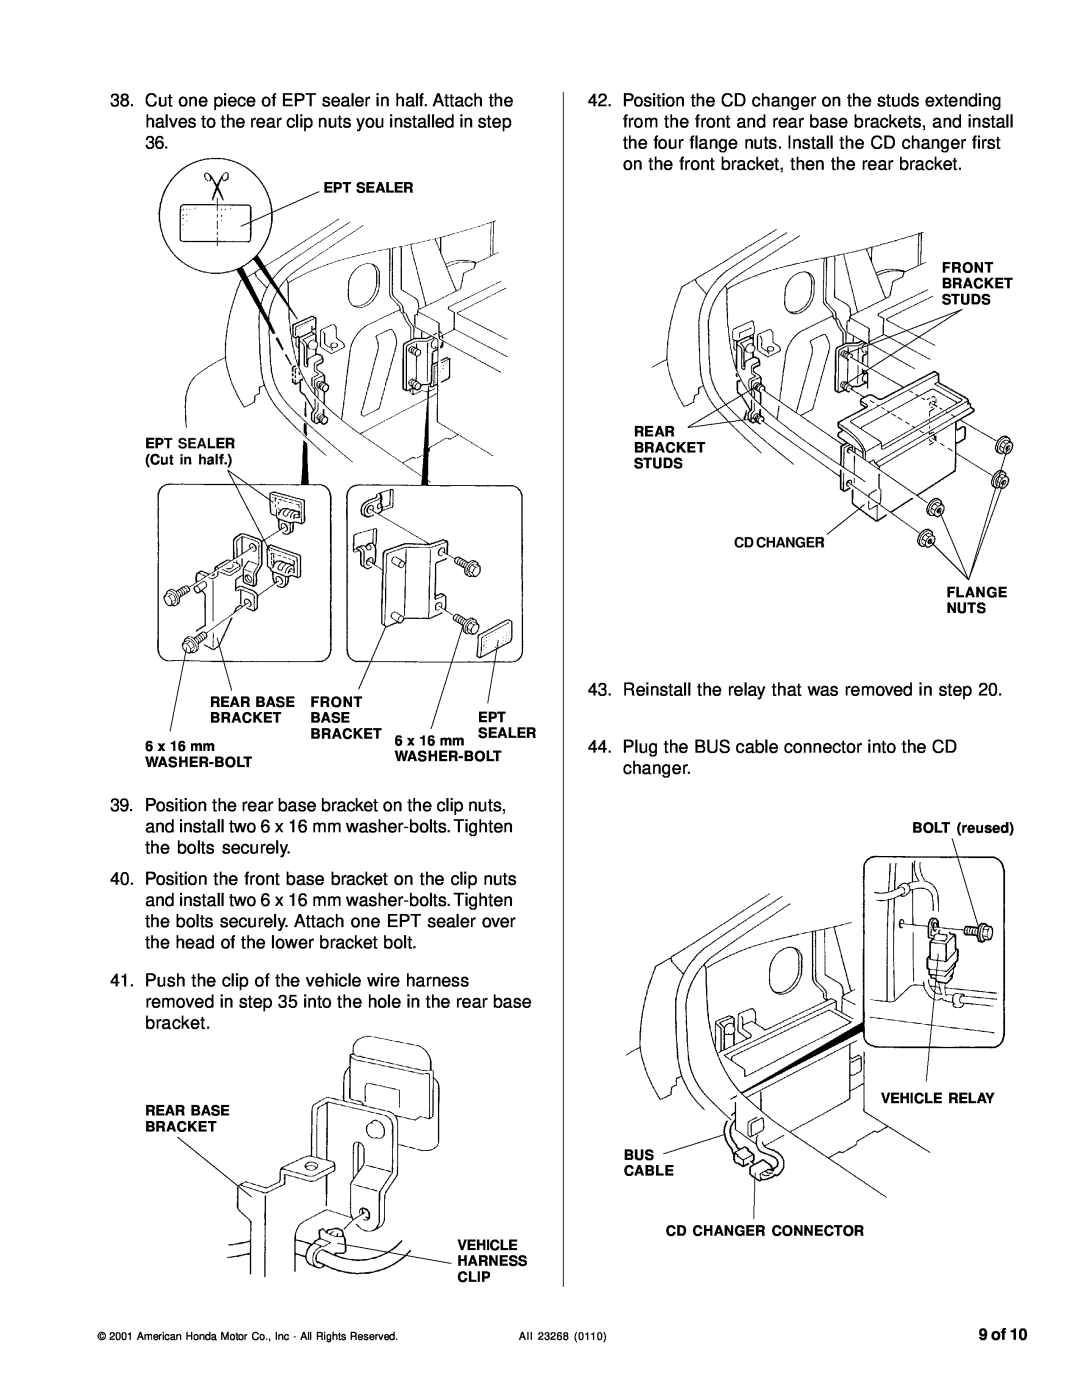 Honda Power Equipment CD Changer installation instructions Reinstall the relay that was removed in step 